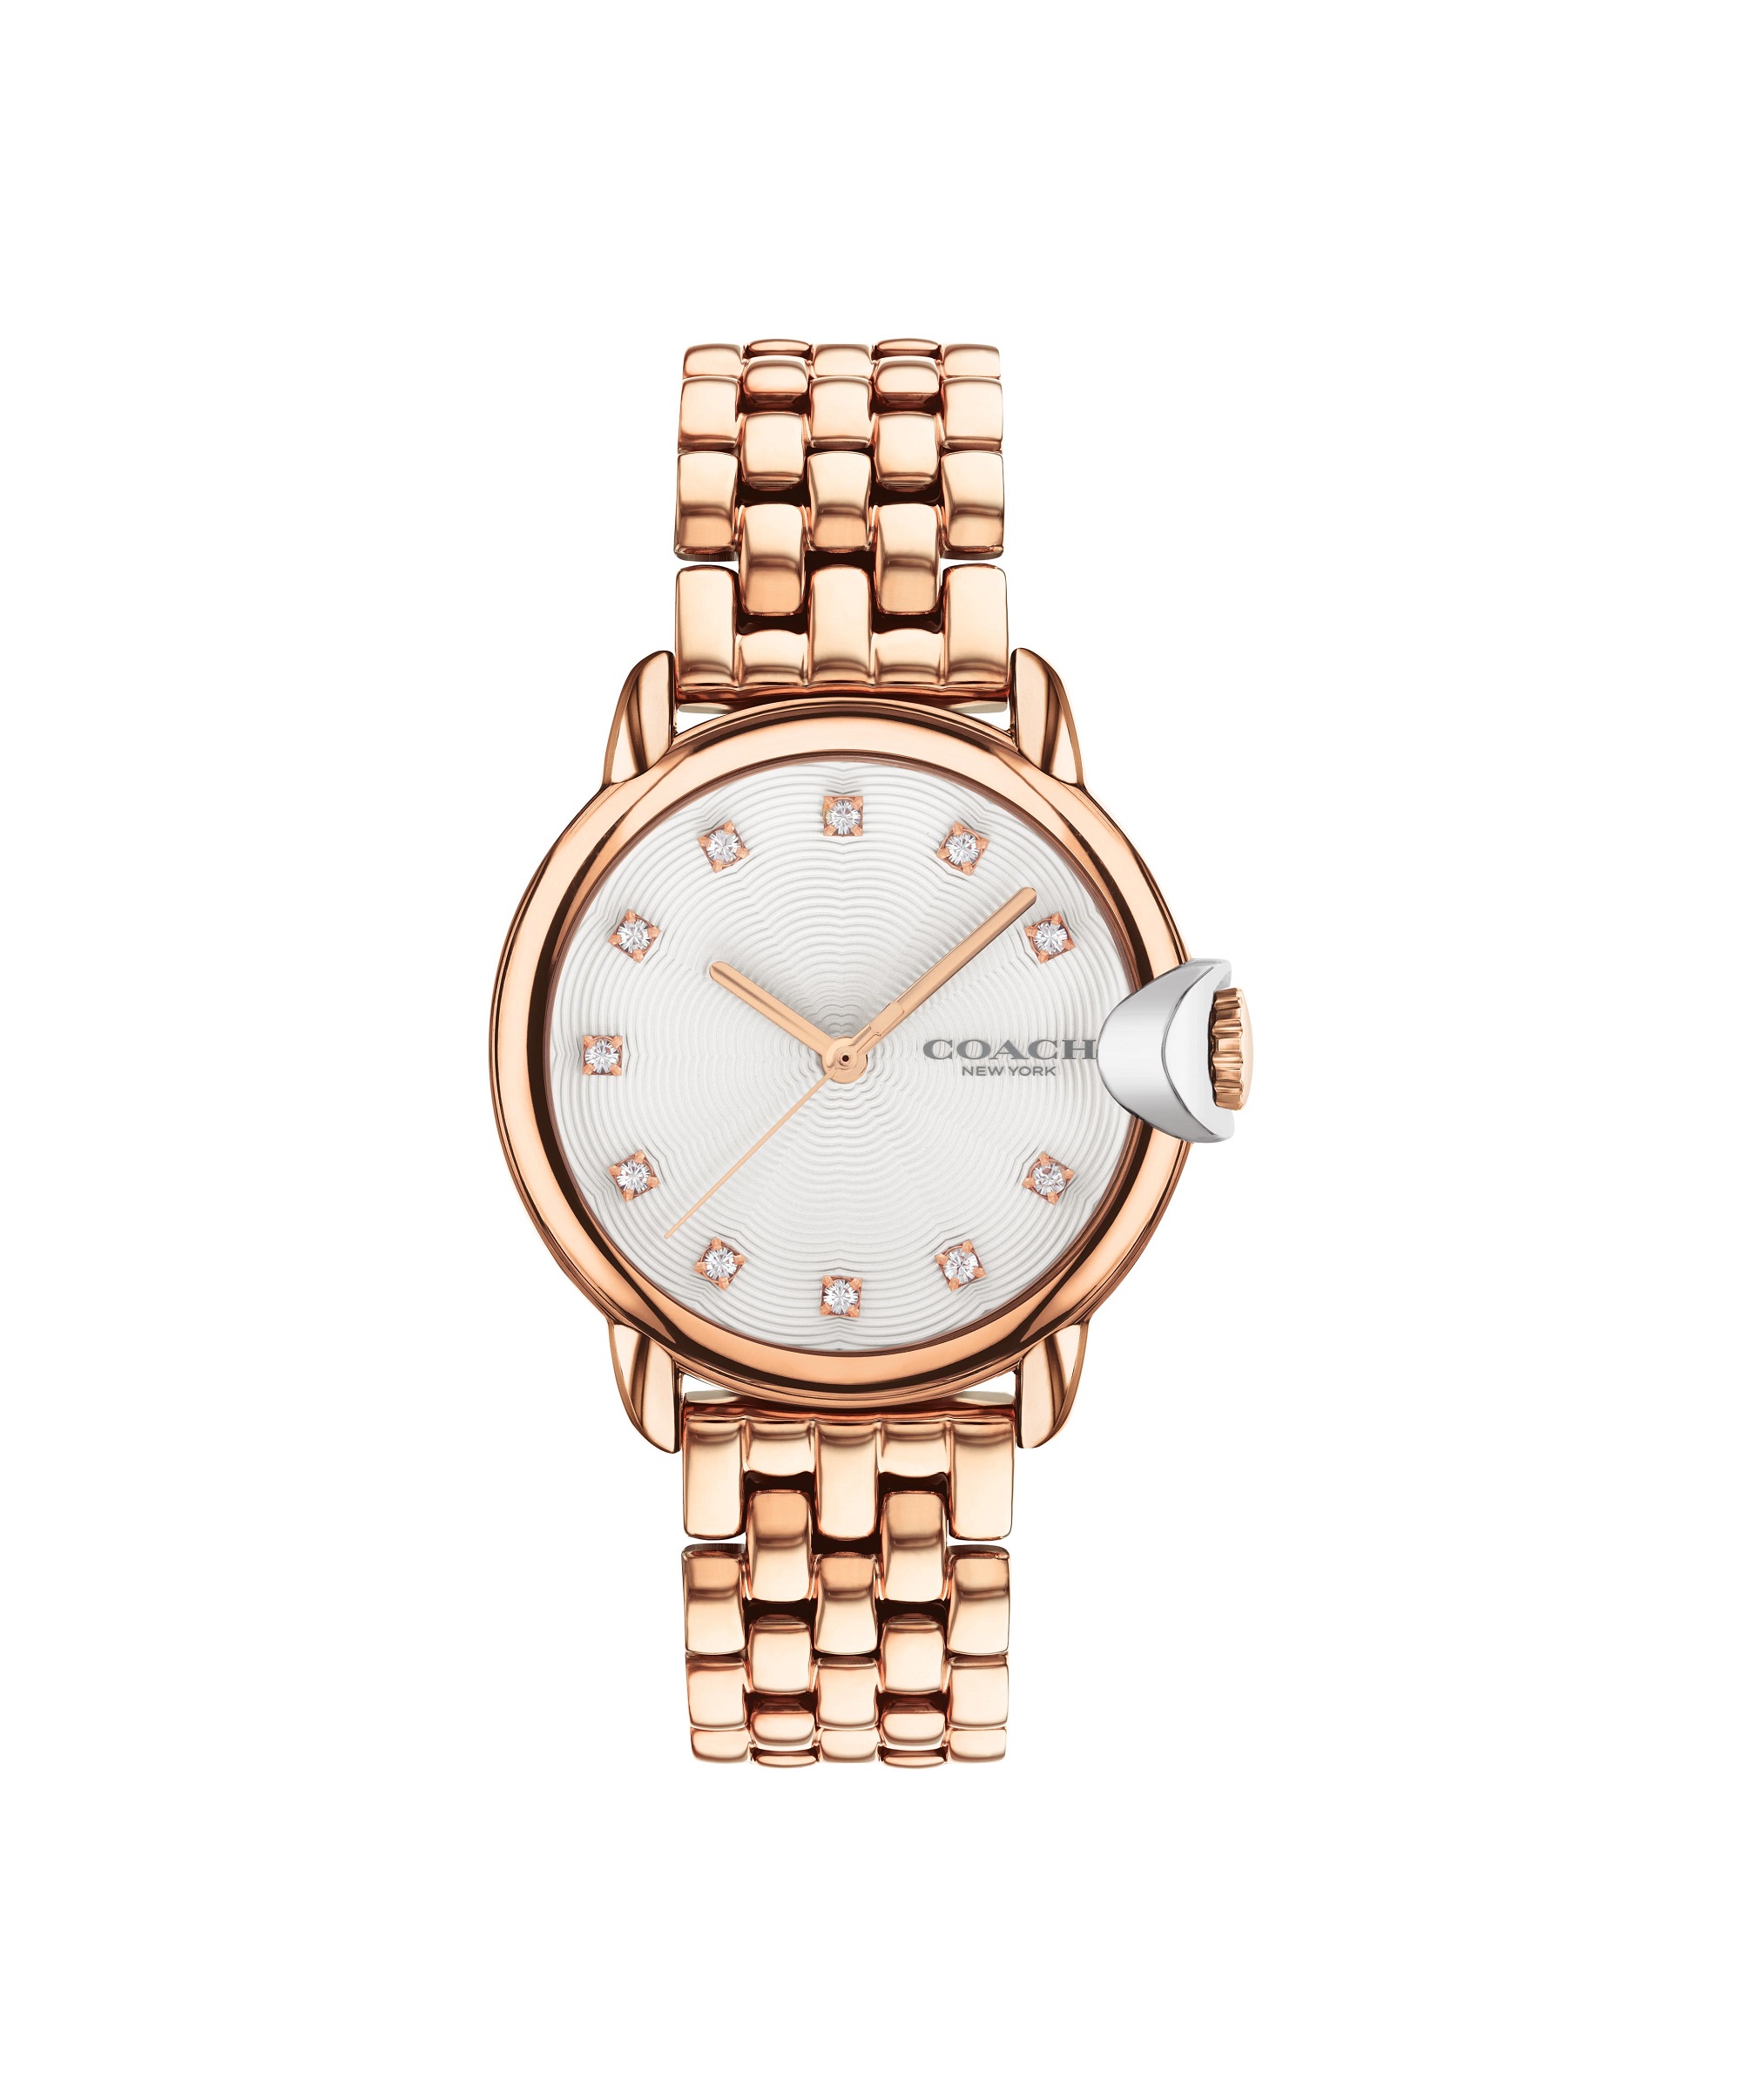 Coach Arden White Women's Watch (14503820) - Jewellery and Watches